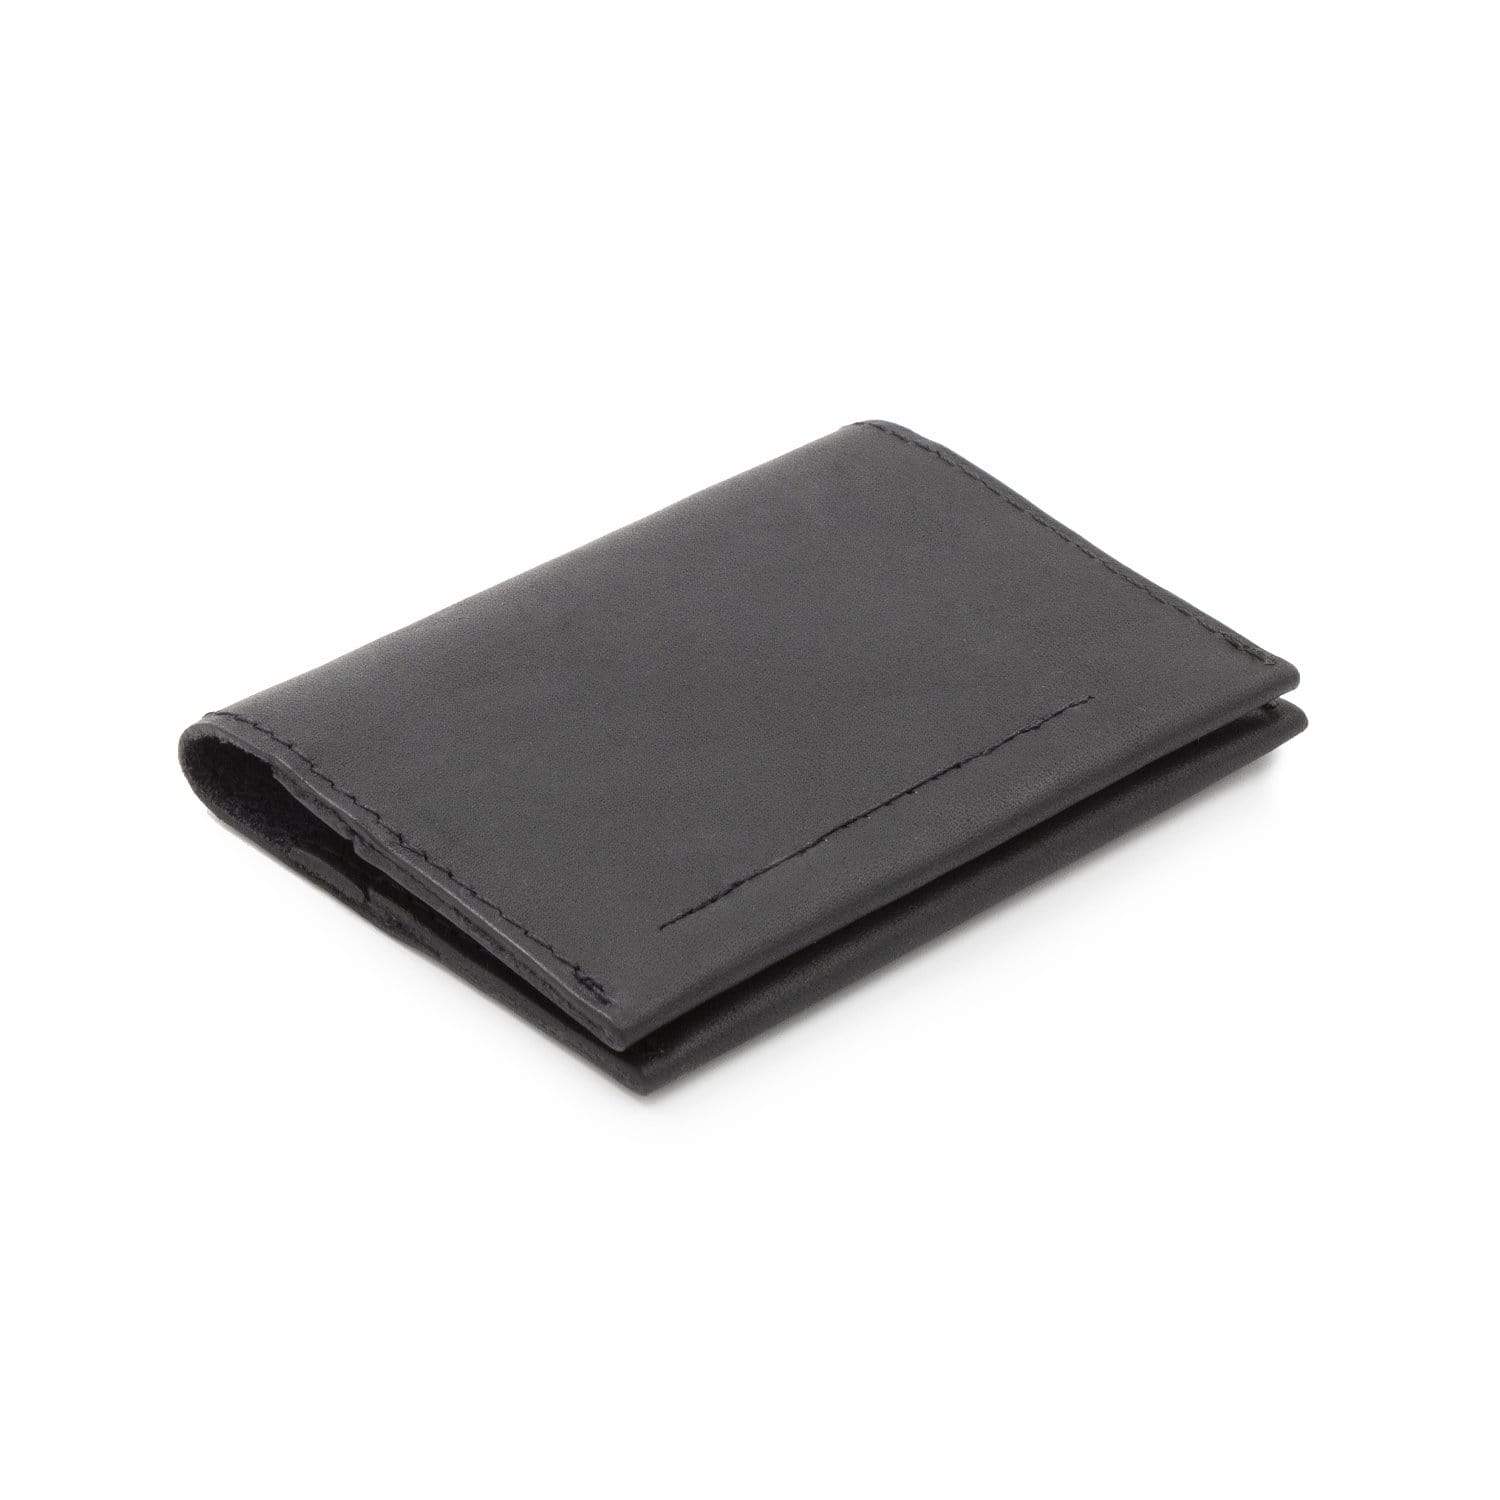 Shield Wallet - Minimalist Leather Business Credit Card Holder